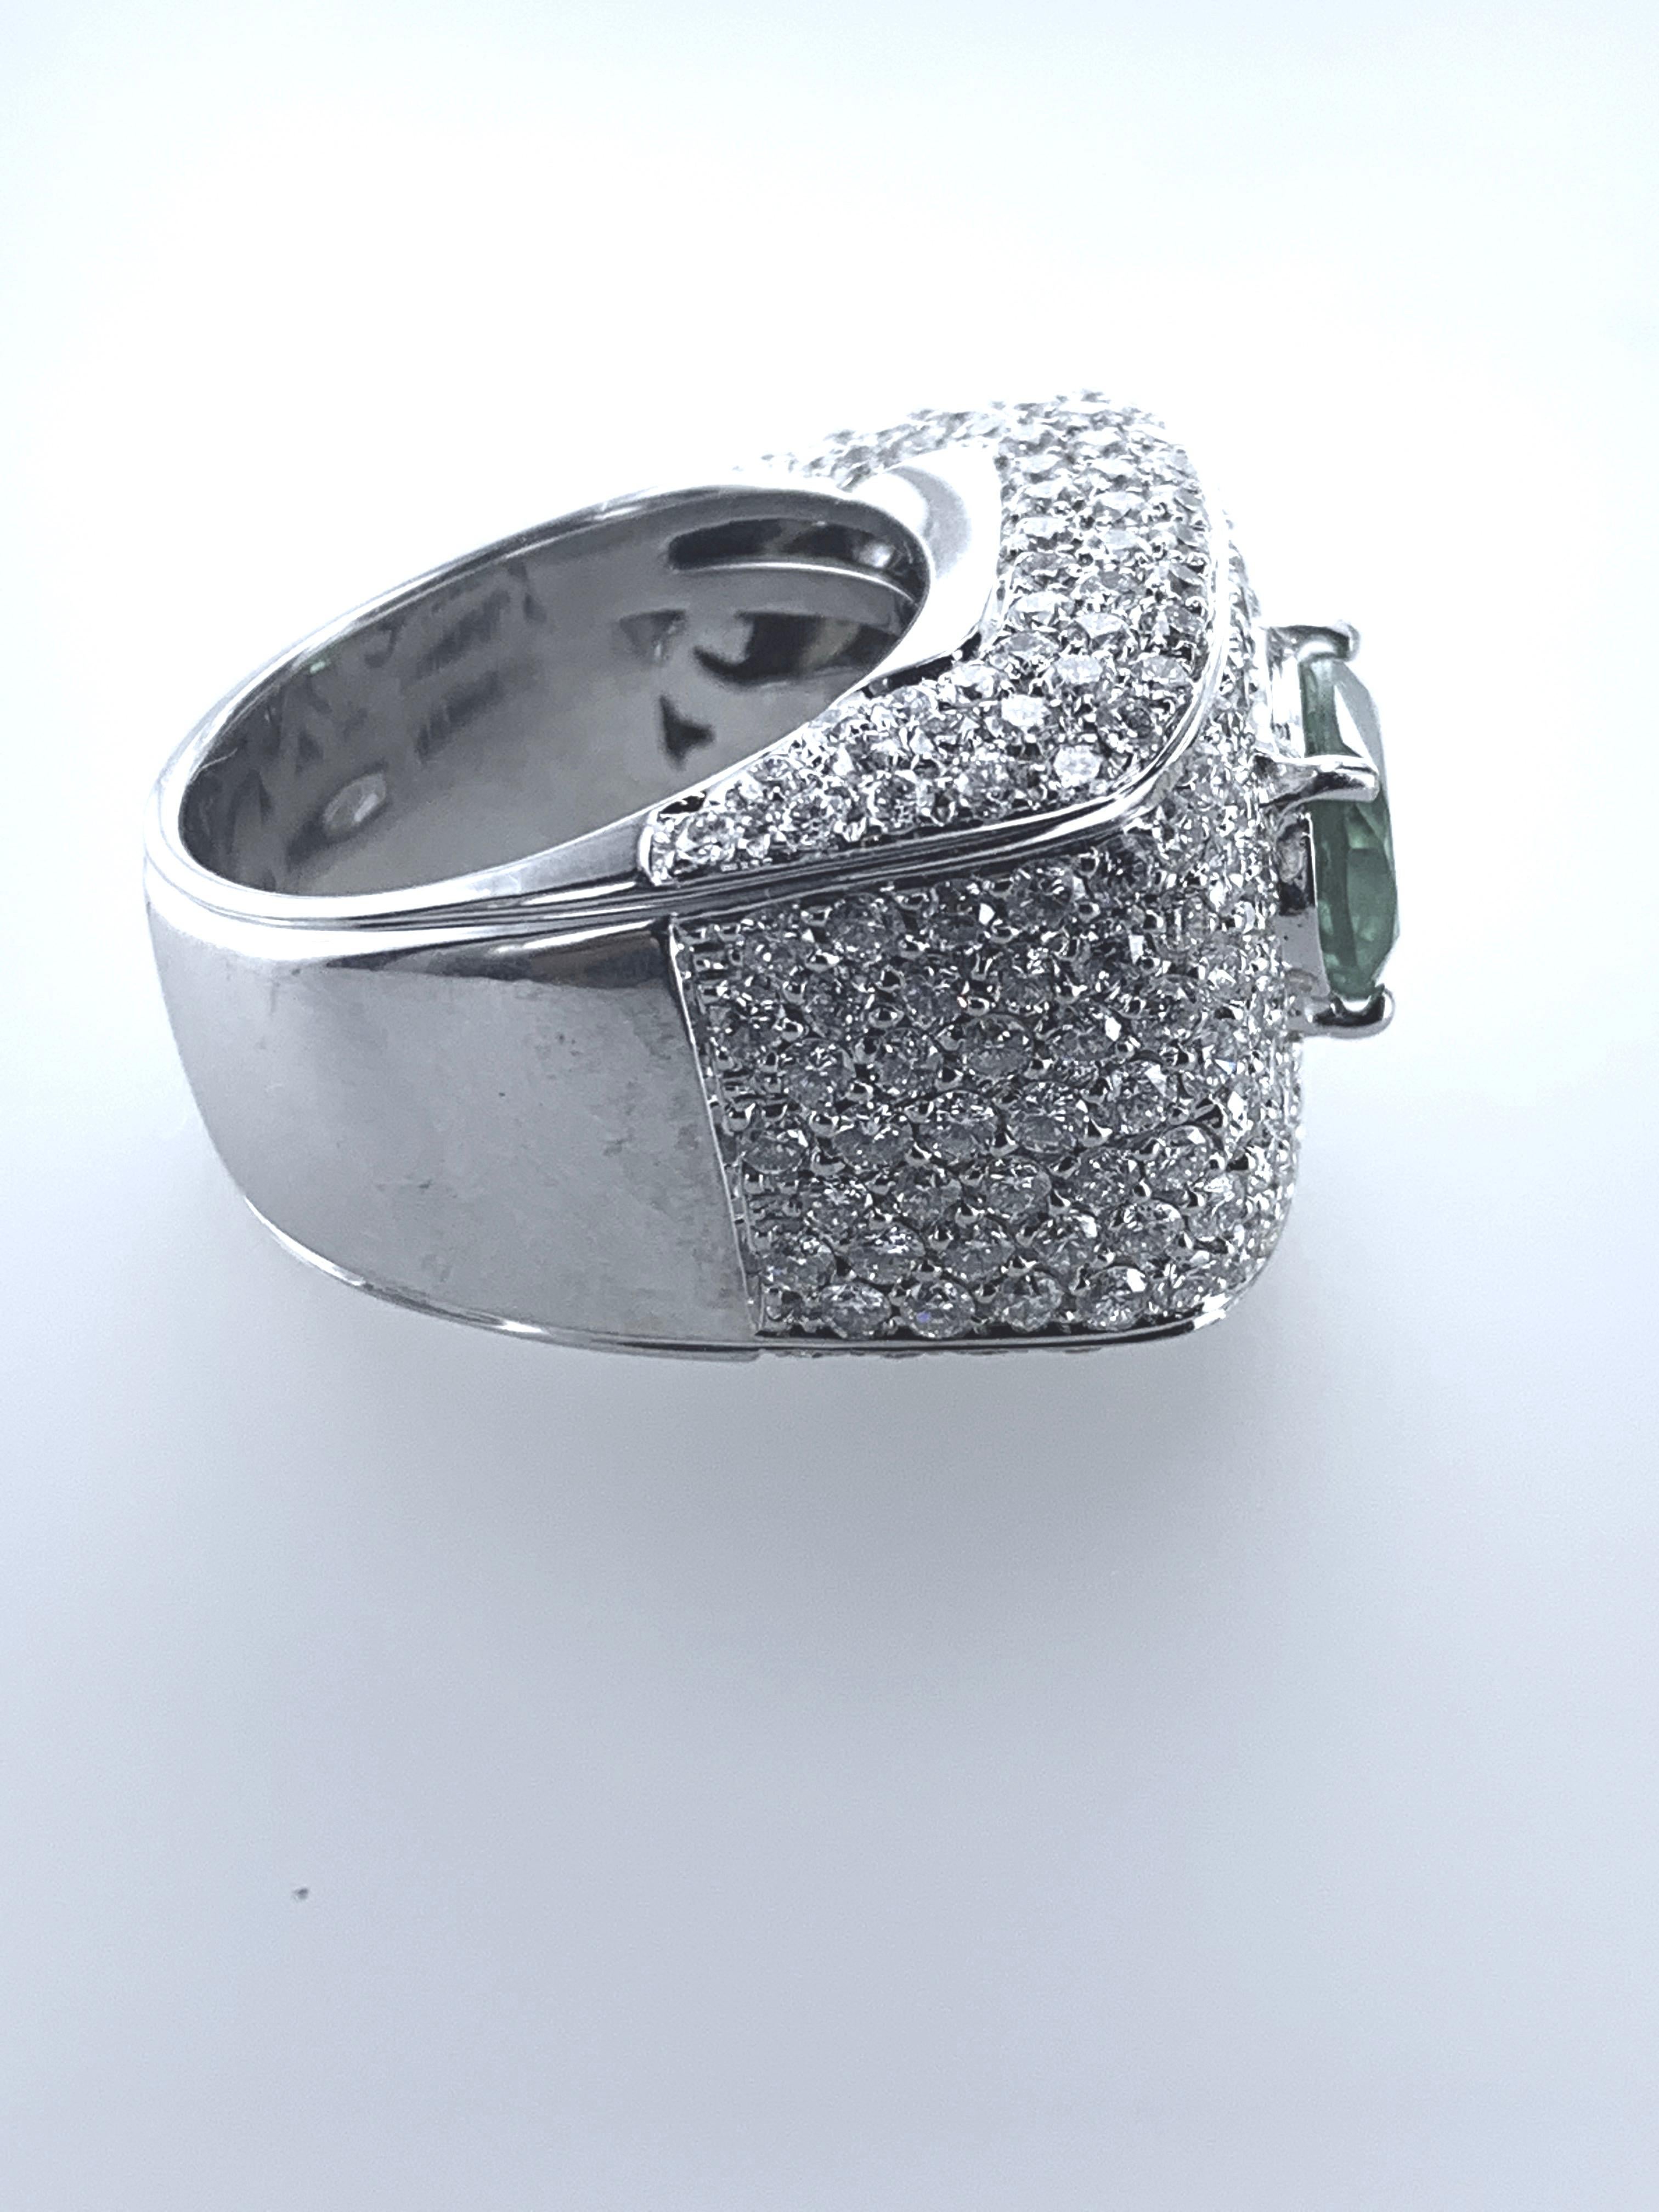 This 4.45 Carat Emerald & Diamond Cocktail Ring is set in 18Kt White Gold. 

Stunningly it empowers the finger with multiple mini Diamonds and its unique rectangular design holding an oval Emerald of 2.09 carats, in the heart of the ring. 

Unique